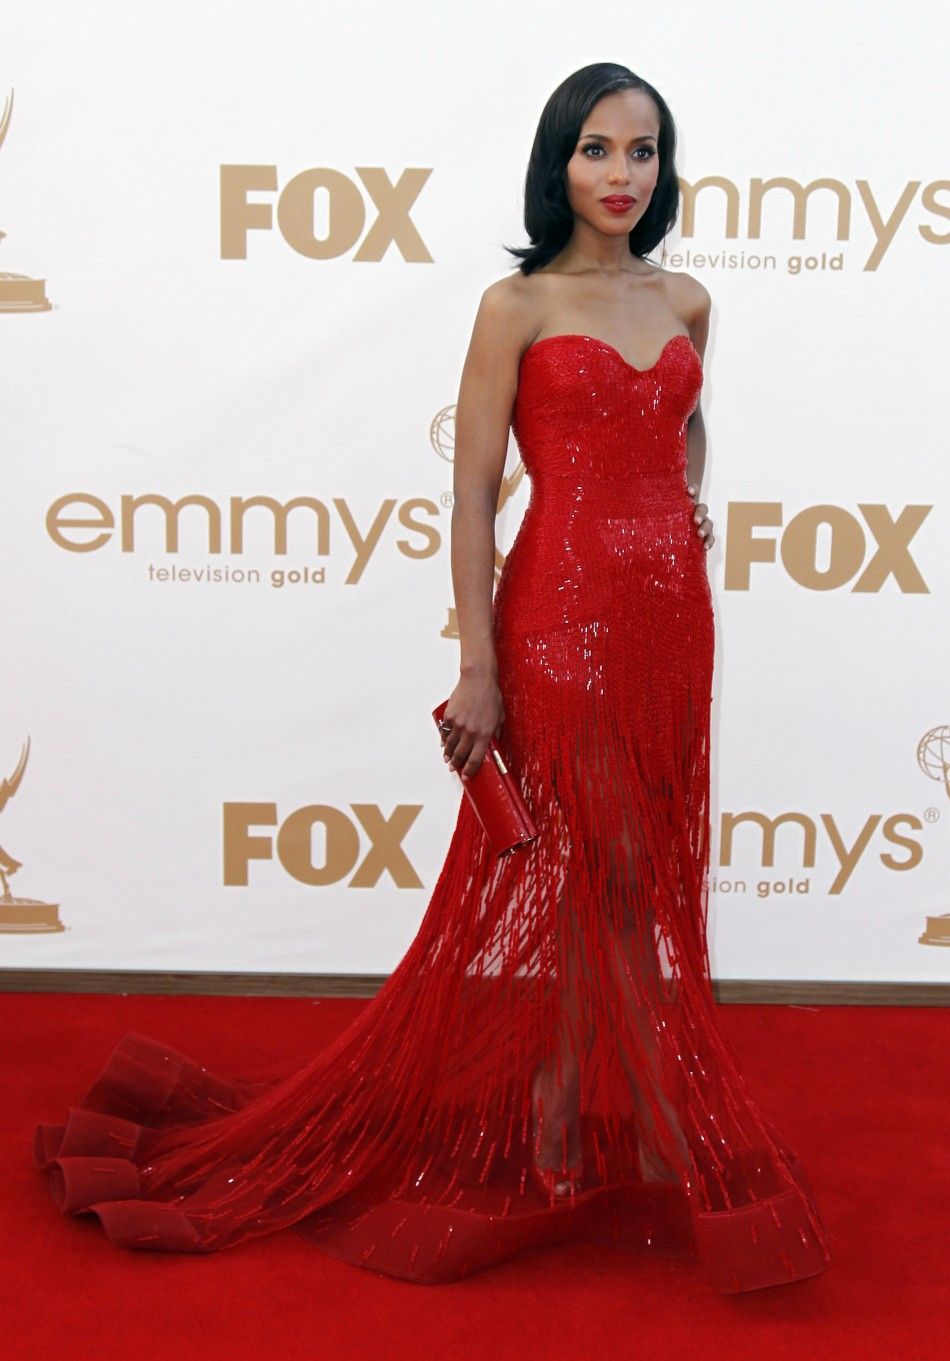 Actress Kerry Washington arrives at the 63rd Primetime Emmy Awards in Los Angeles September 18, 2011.